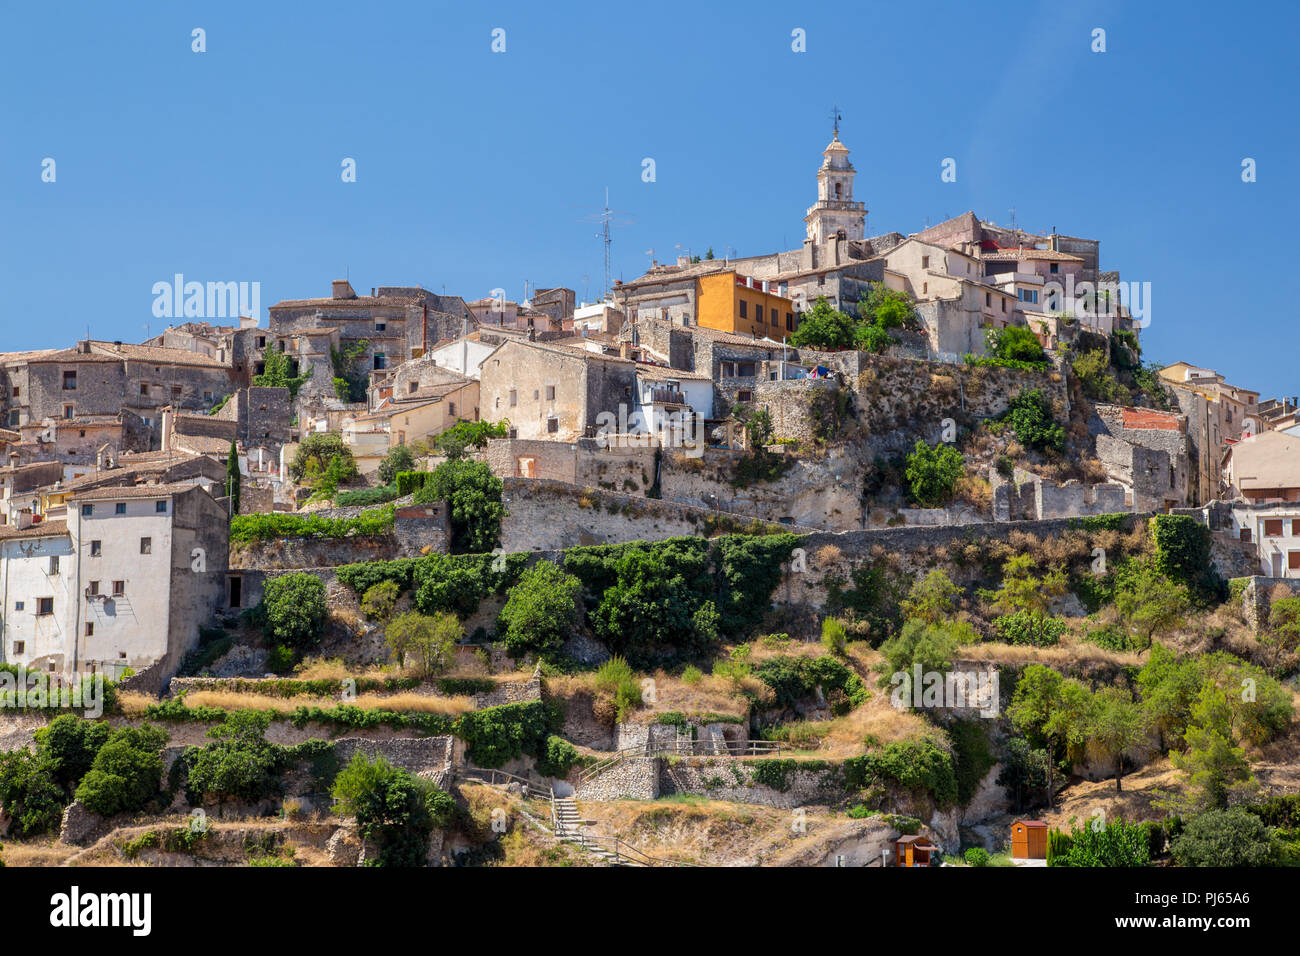 Bocairent hilltop old medieval town, Valencian Community, Spain Stock Photo